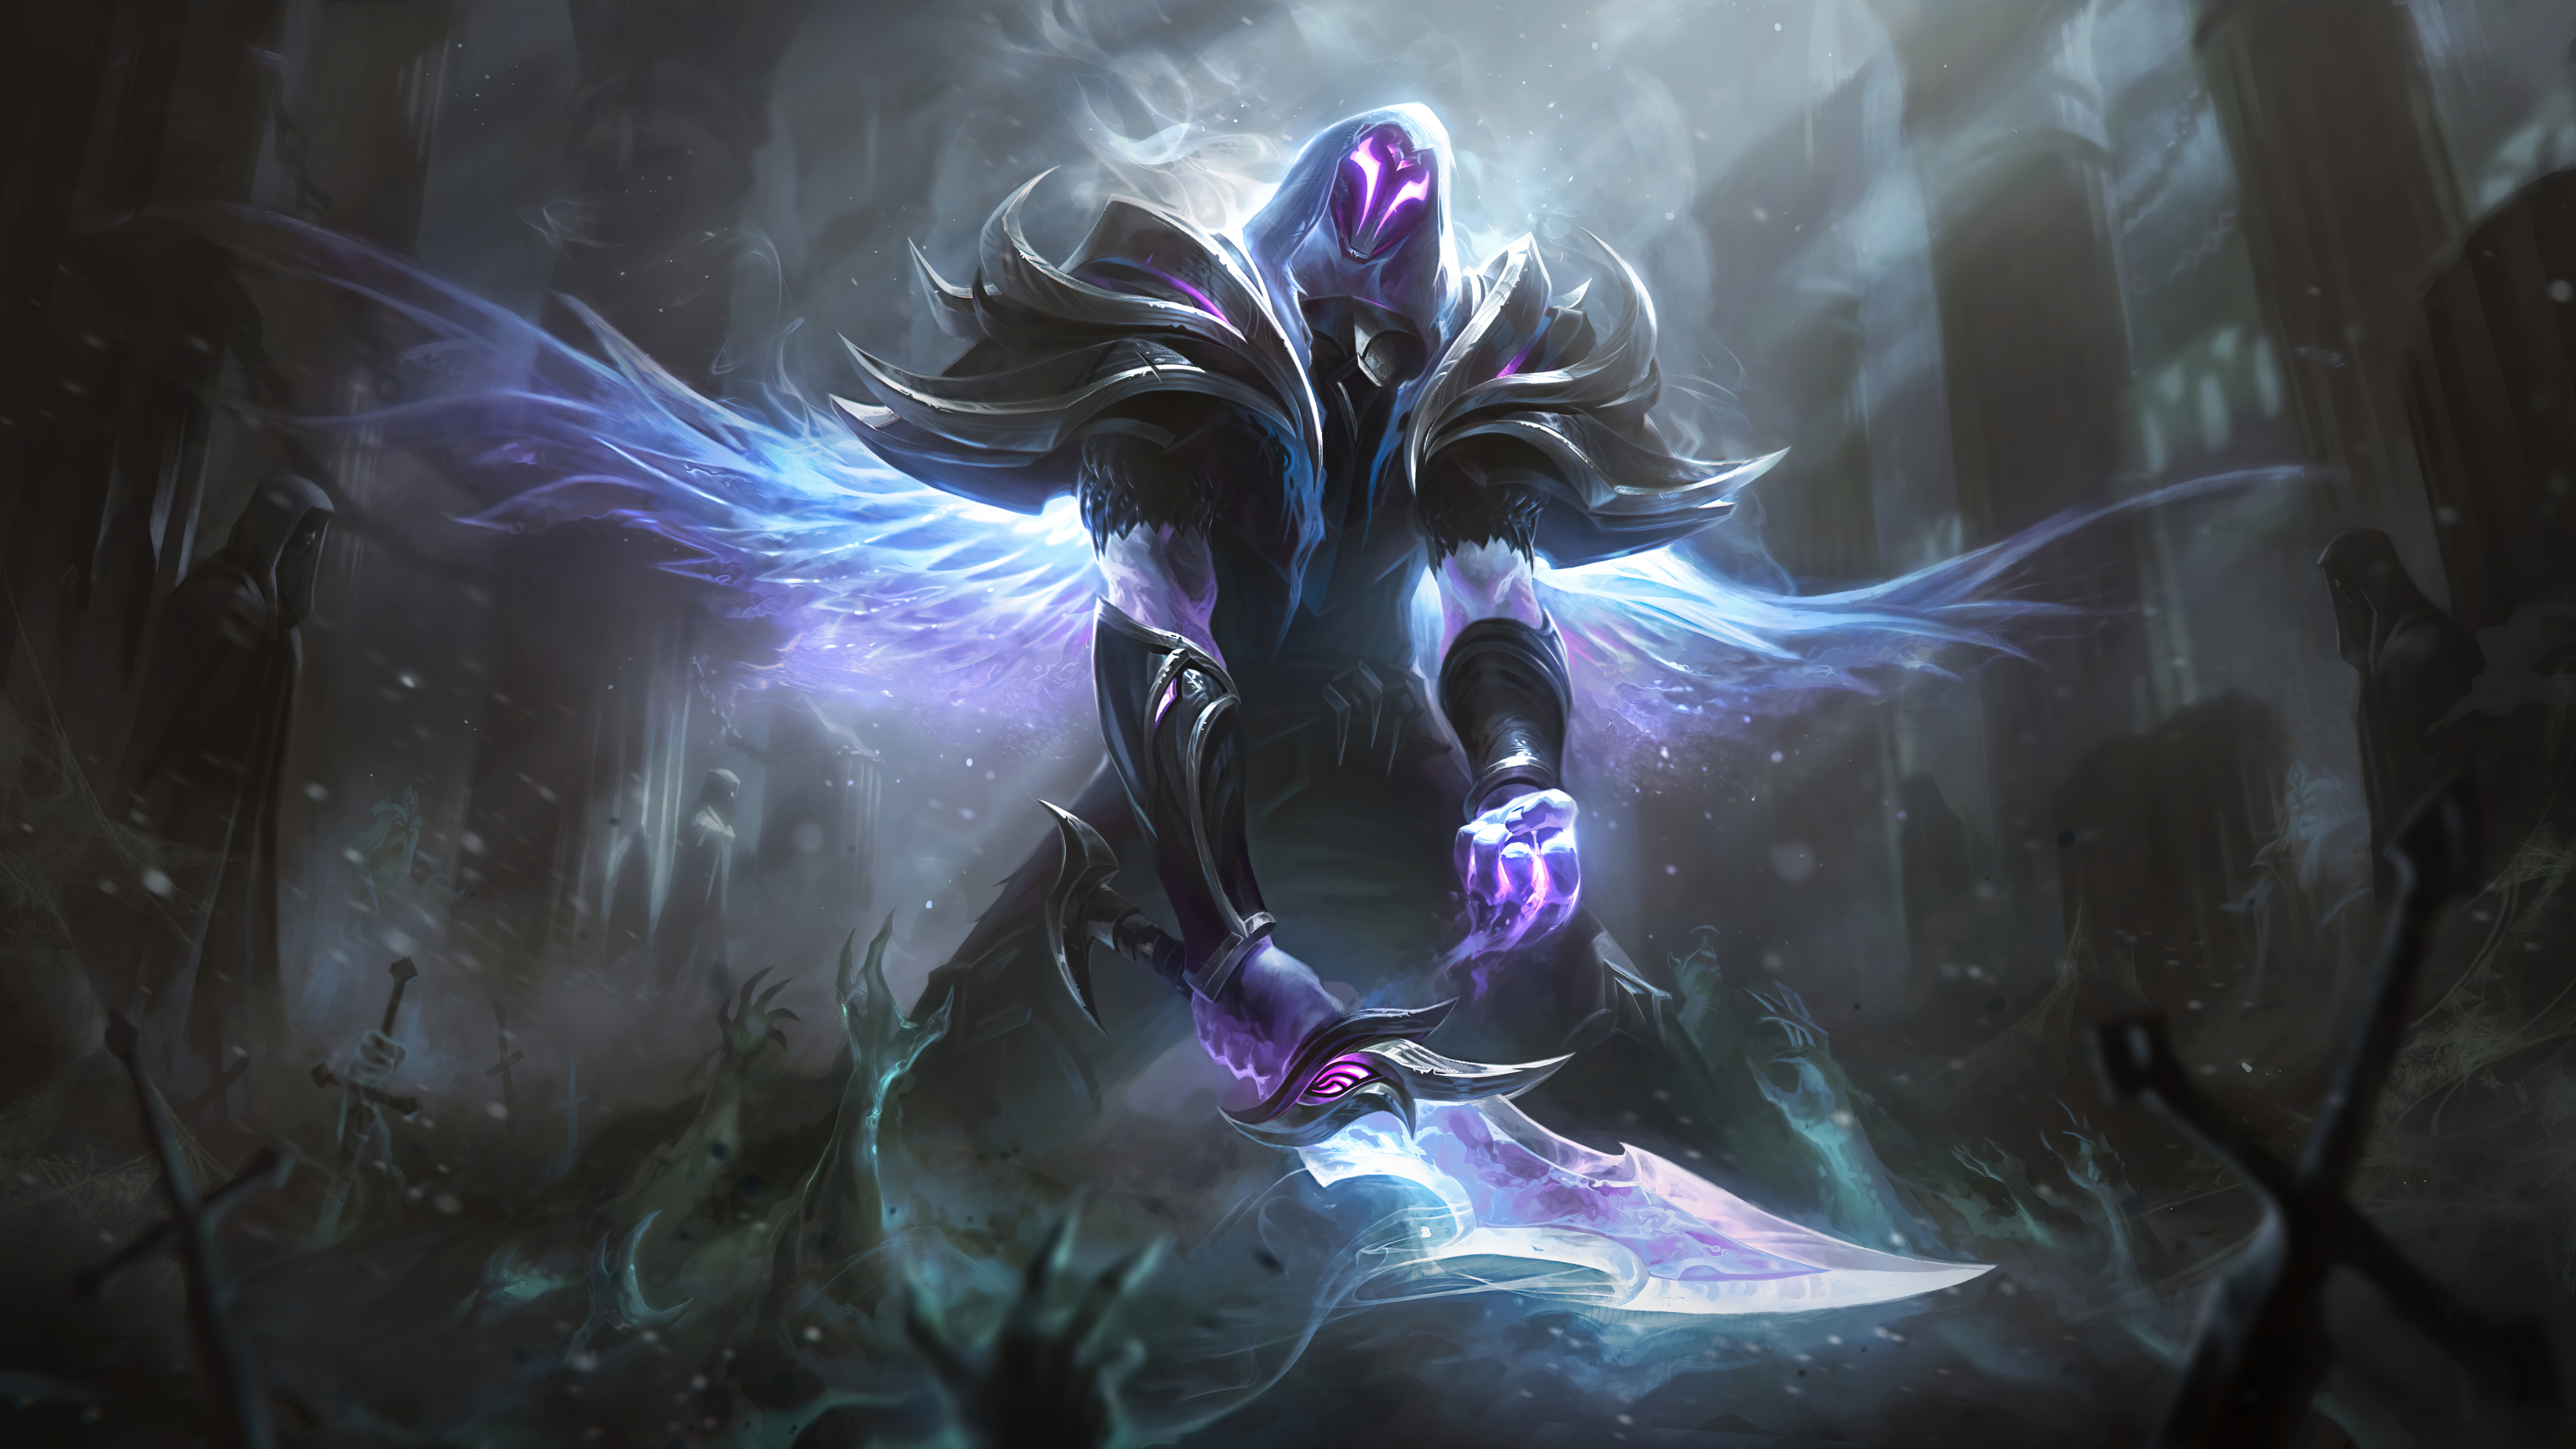 General 7680x4320 Pyke (league of Legends) Support (League Of Legends) League of Legends Riot Games digital art 4K GZG Ashen Knight Ashen Knight (League of Legends)